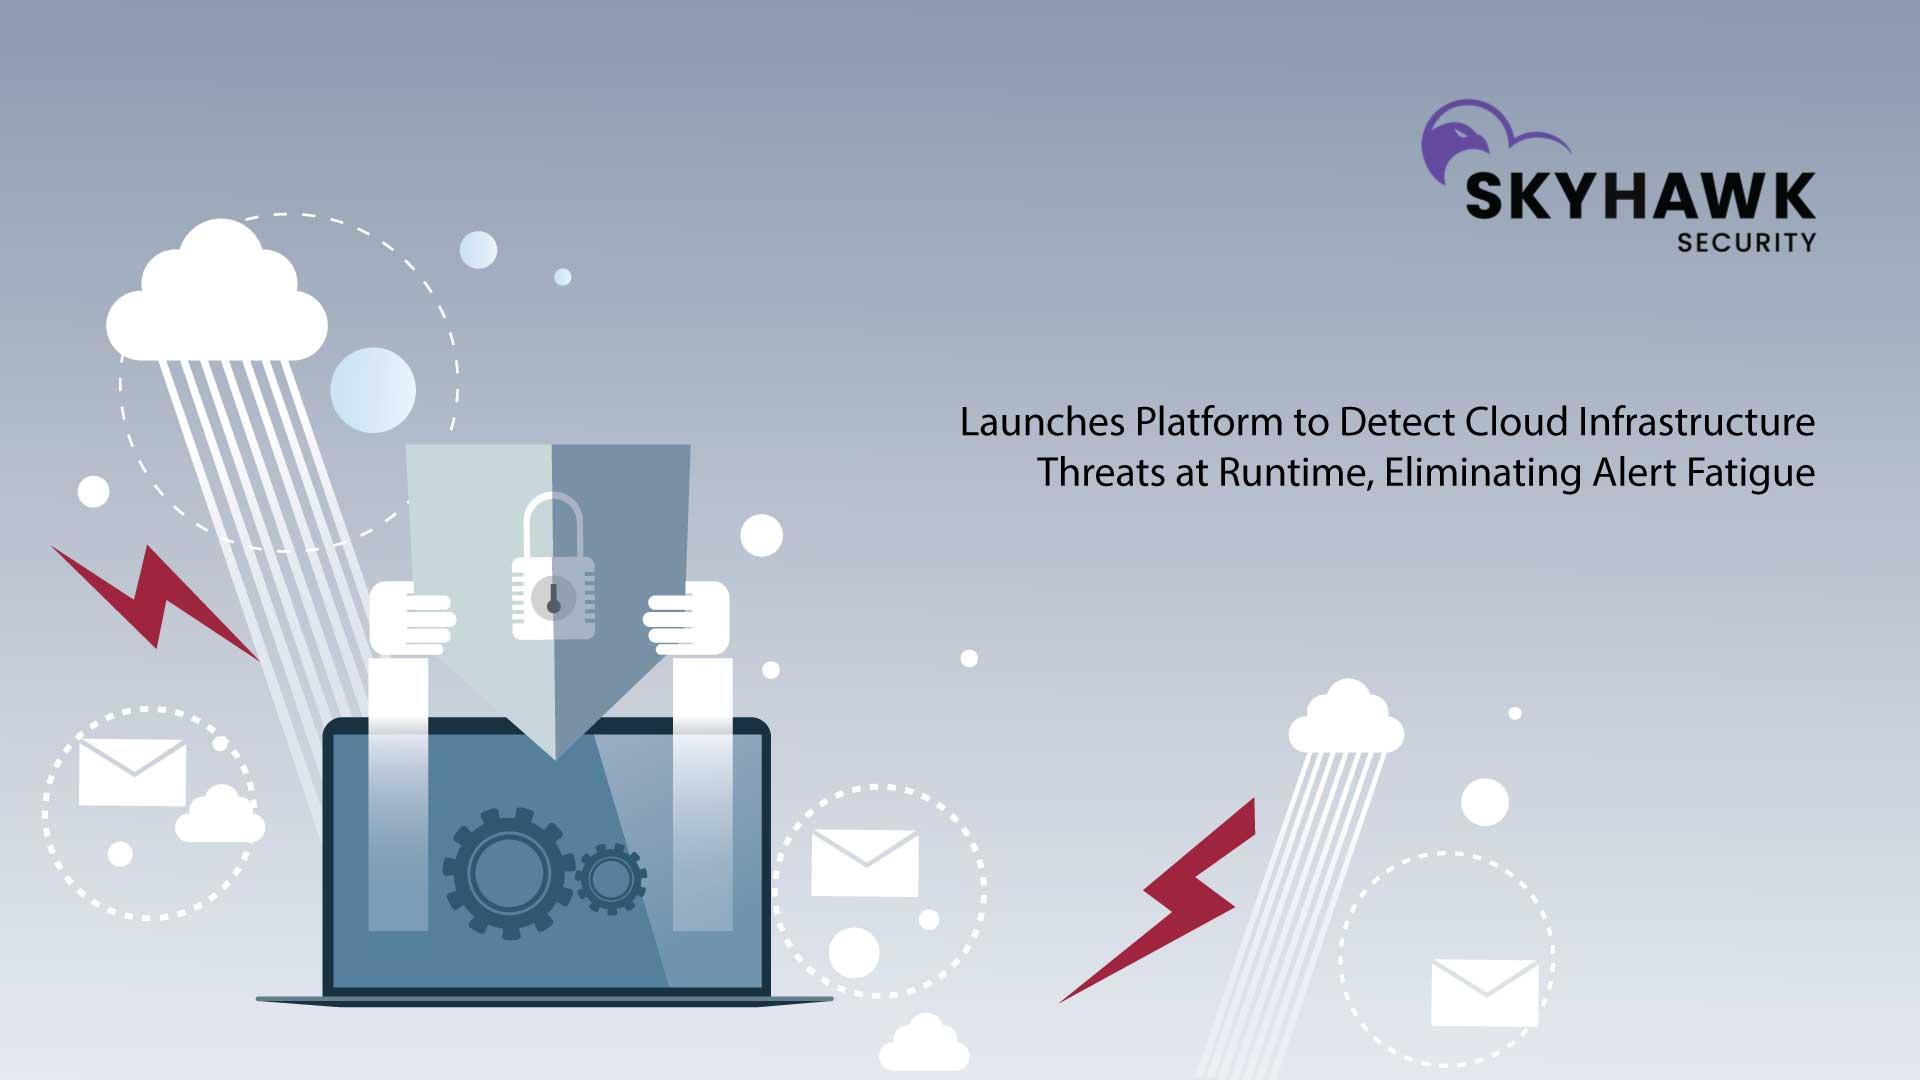 Skyhawk Security Launches Platform to Detect Cloud Infrastructure Threats at Runtime, Eliminating Alert Fatigue